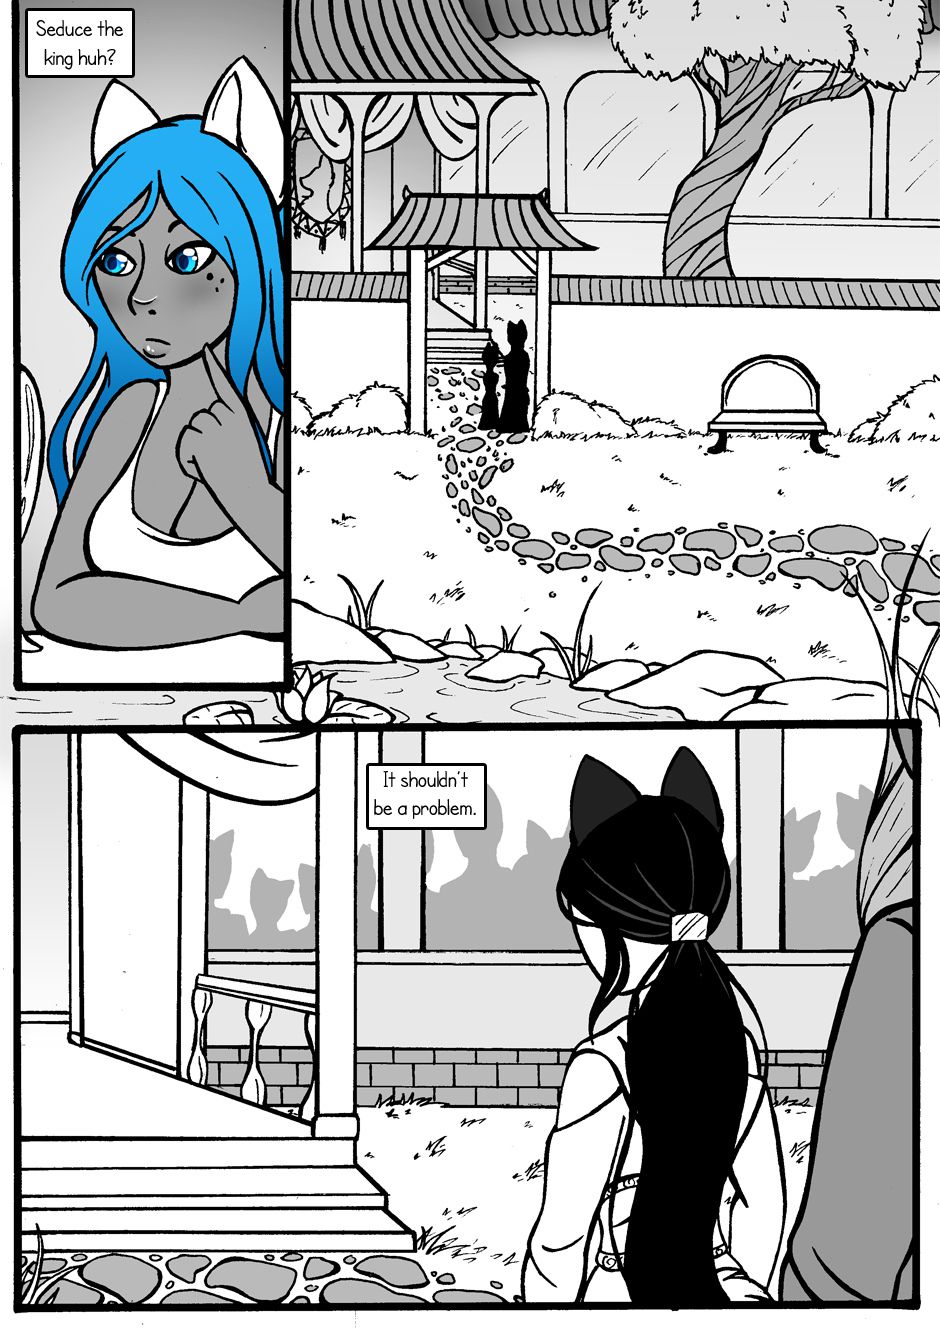 [Jeny-jen94]Between Kings and Queens[ongoing] 22